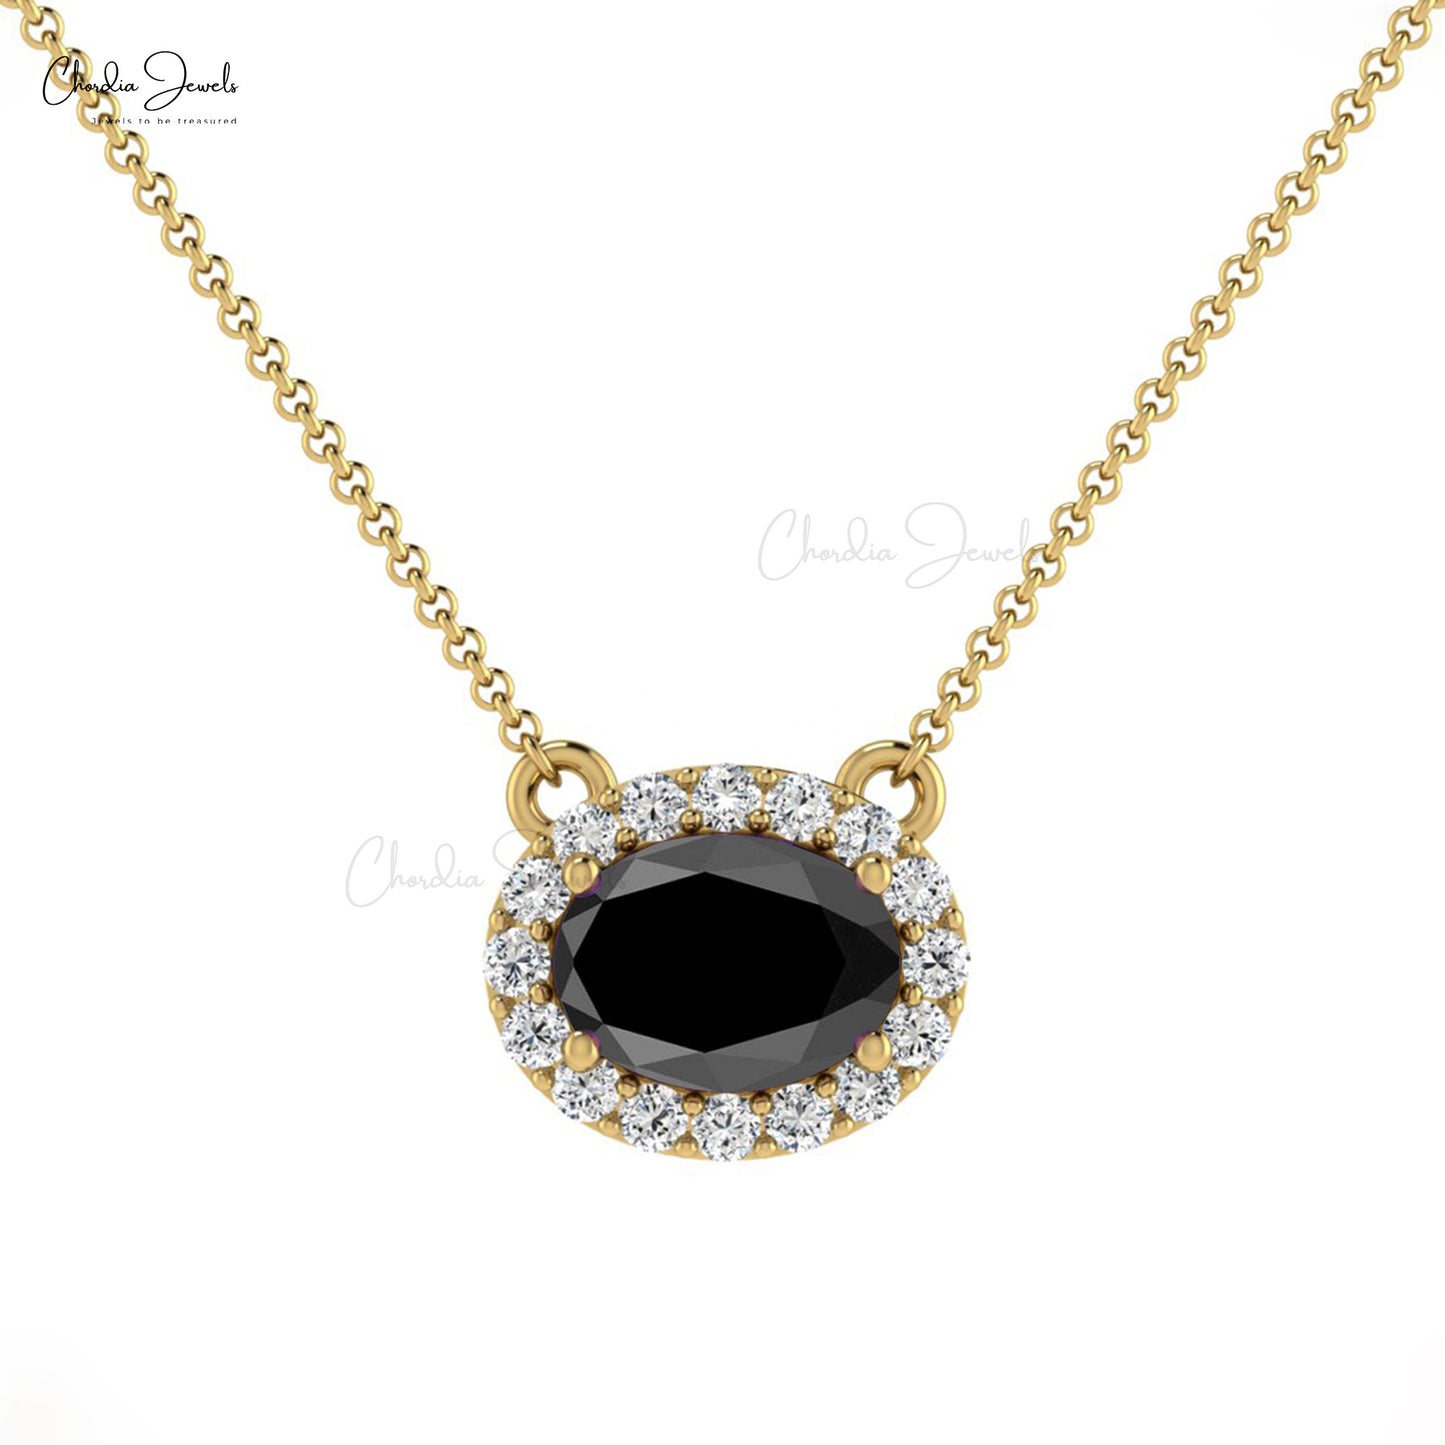 Natural Black Diamond Necklace, 14k Solid Gold Diamond Necklace, 7x5mm Oval Faceted Gemstone Necklace, Handmade Necklace, Bridesmaid Necklace for Gift